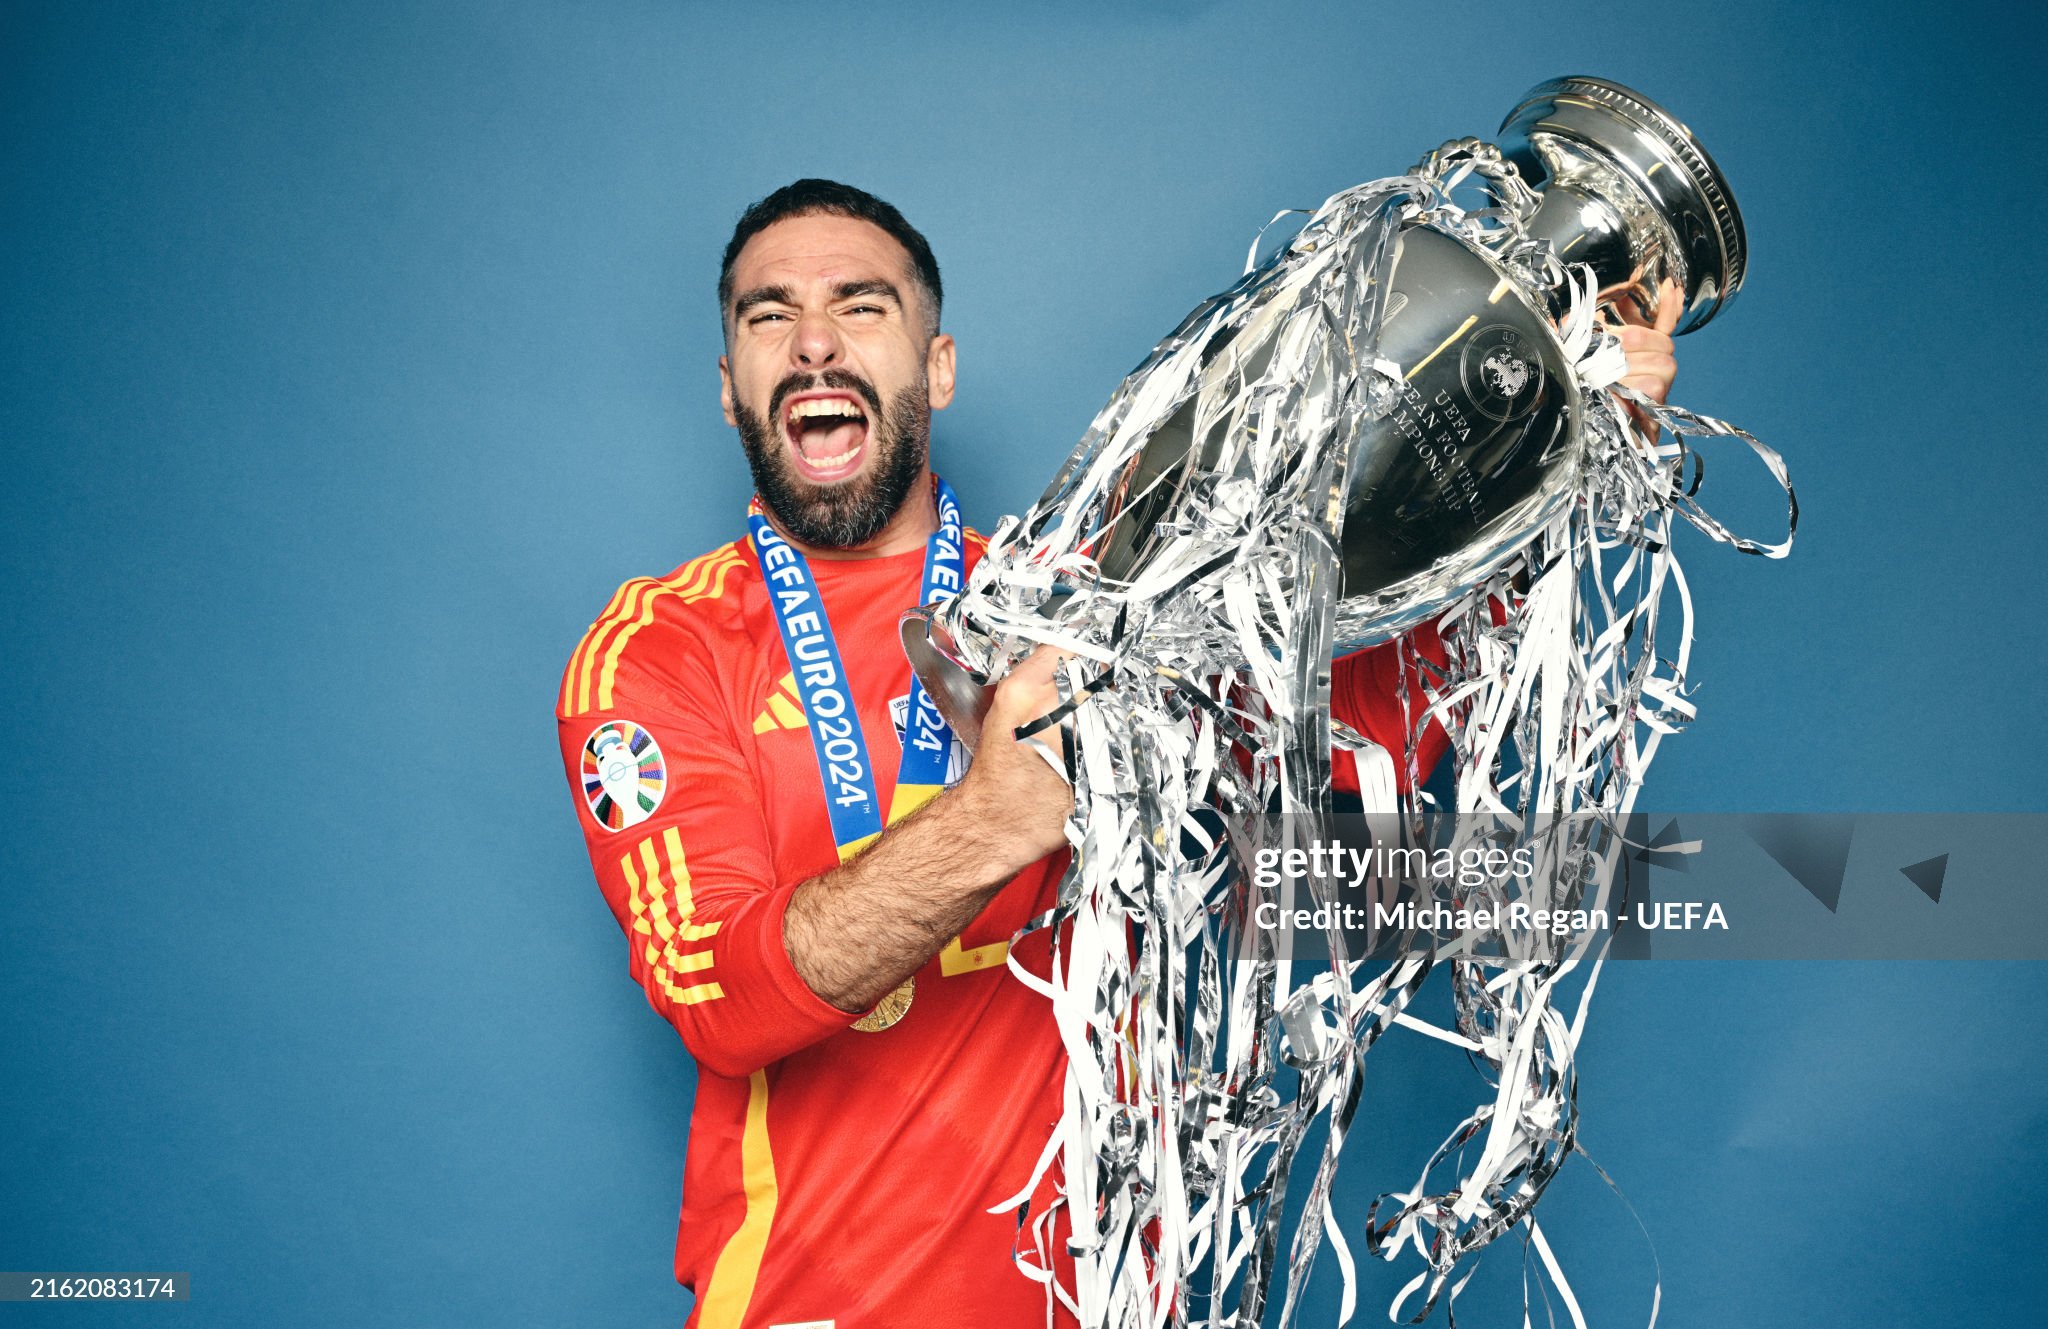 gettyimages-2162083174-2048x2048.jpg